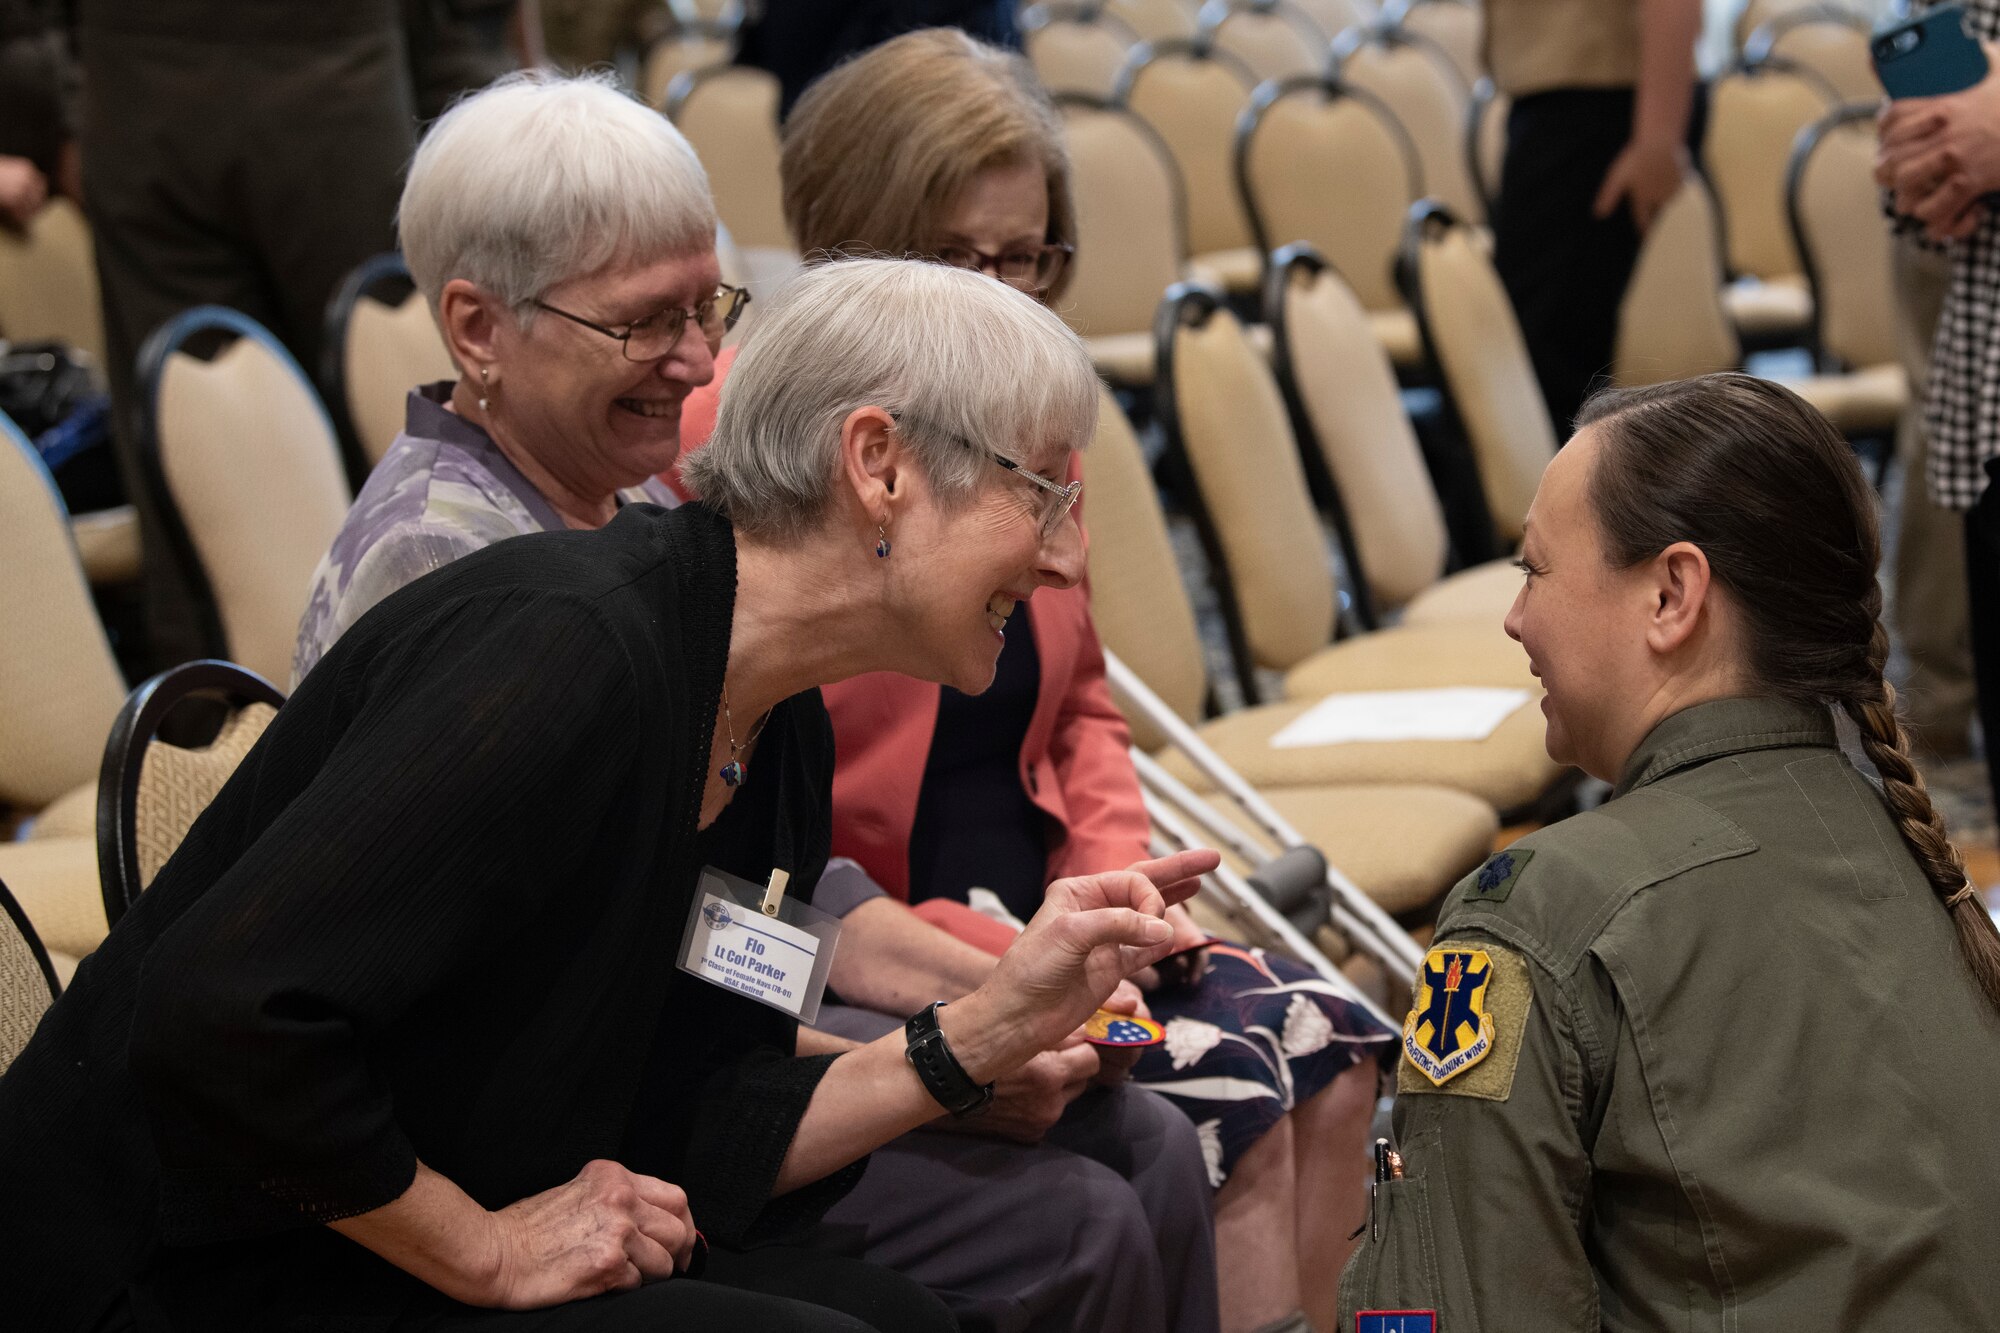 Lt. Col. (Ret.) Florence Parker speaks with an attendee during the Undergraduate Combat Systems Officer Training (UCT) Sapphire Event March 11, 2022, at Naval Air Station Pensacola, Florida